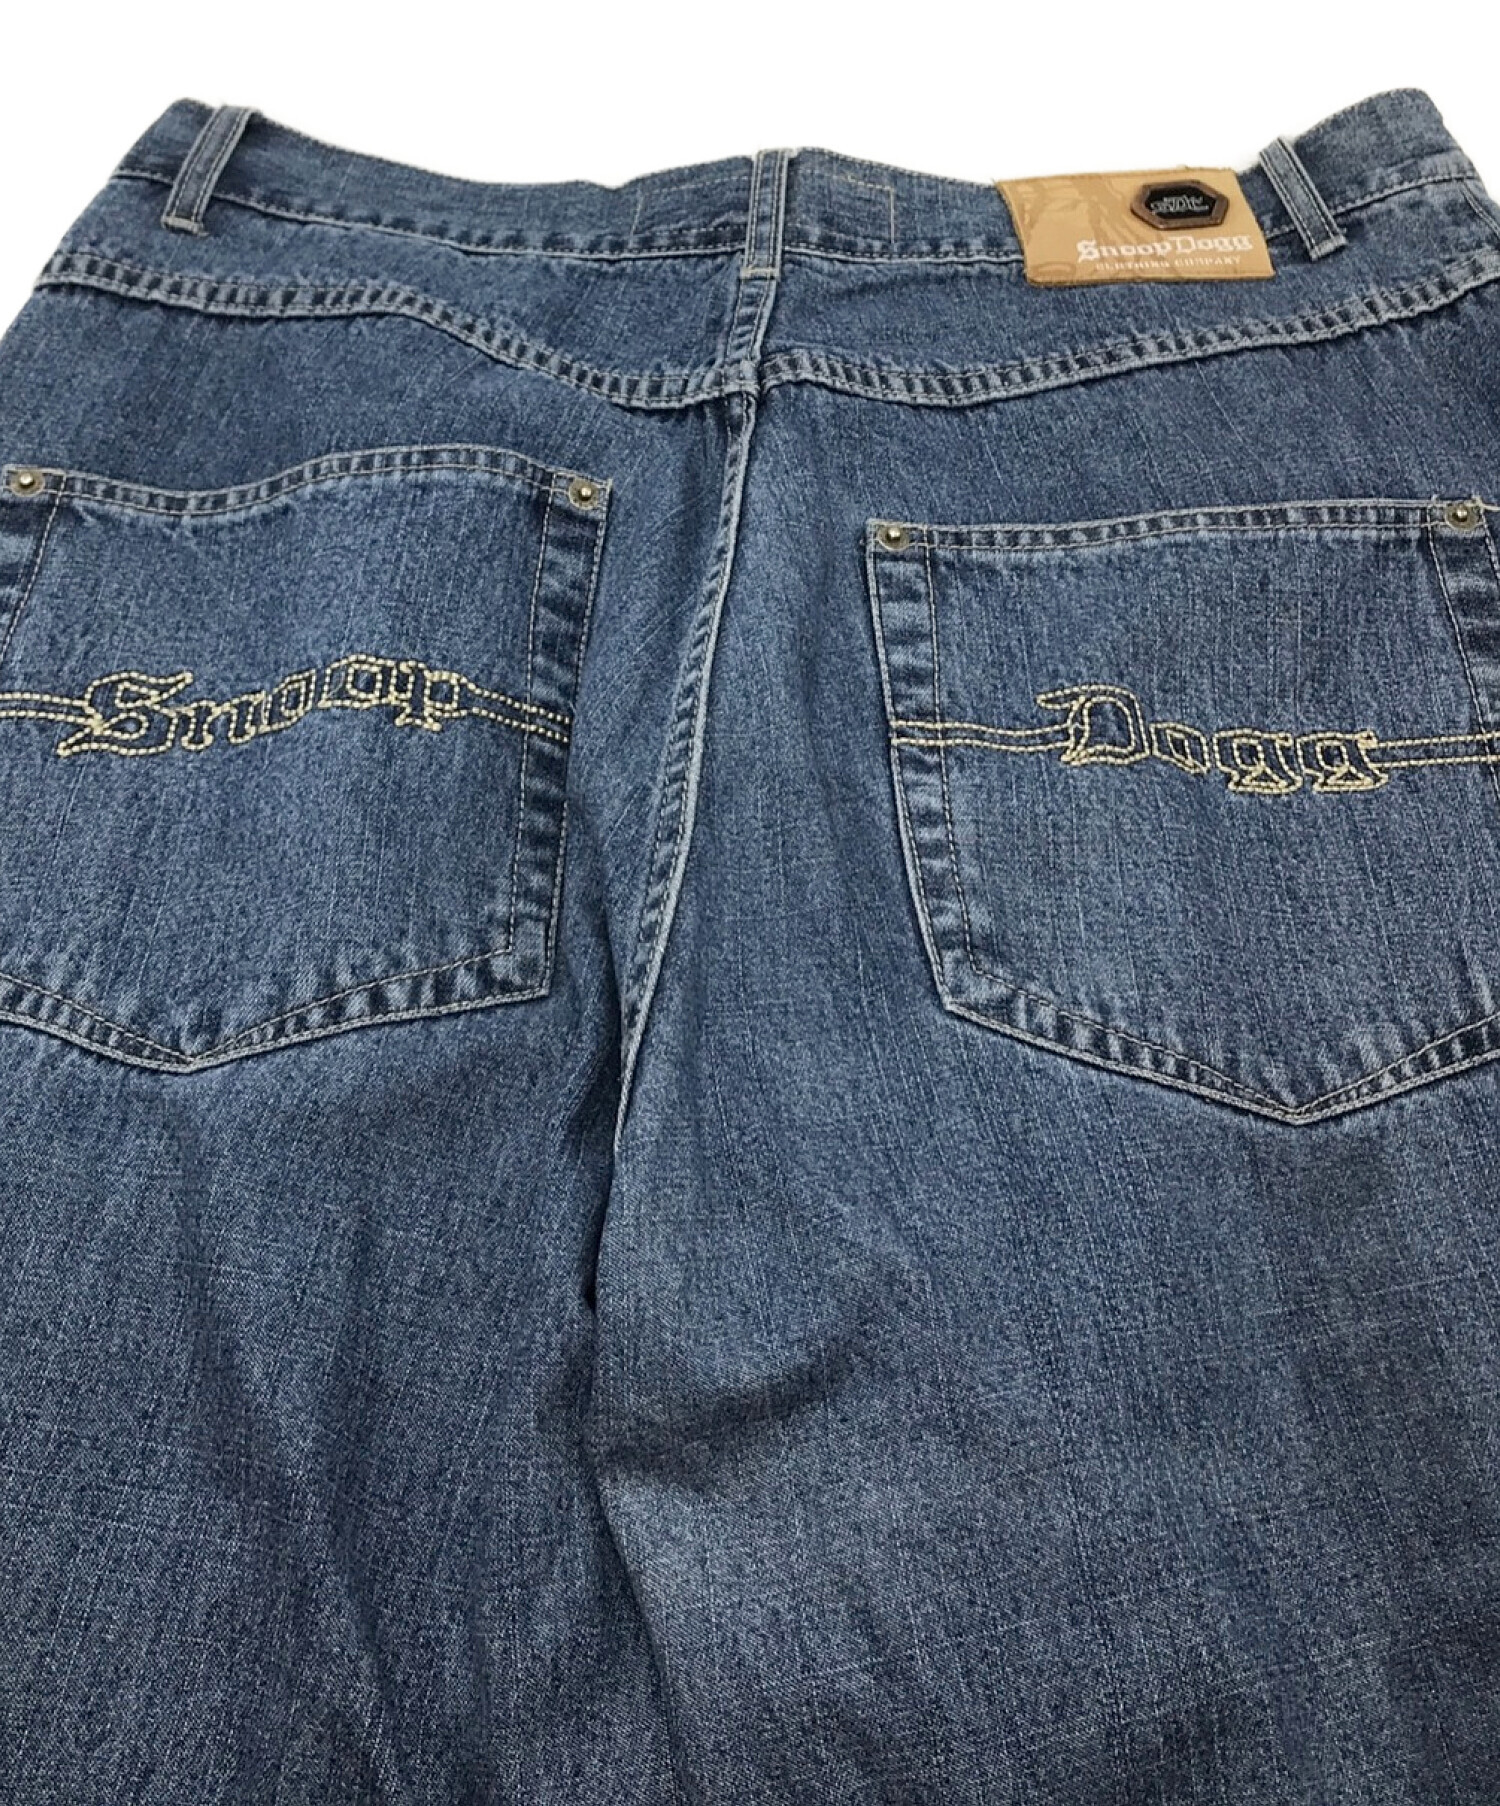 SNOOP DOG JEANS スヌープドッグジーンズ 90s VINTAGE ヴィンテージ